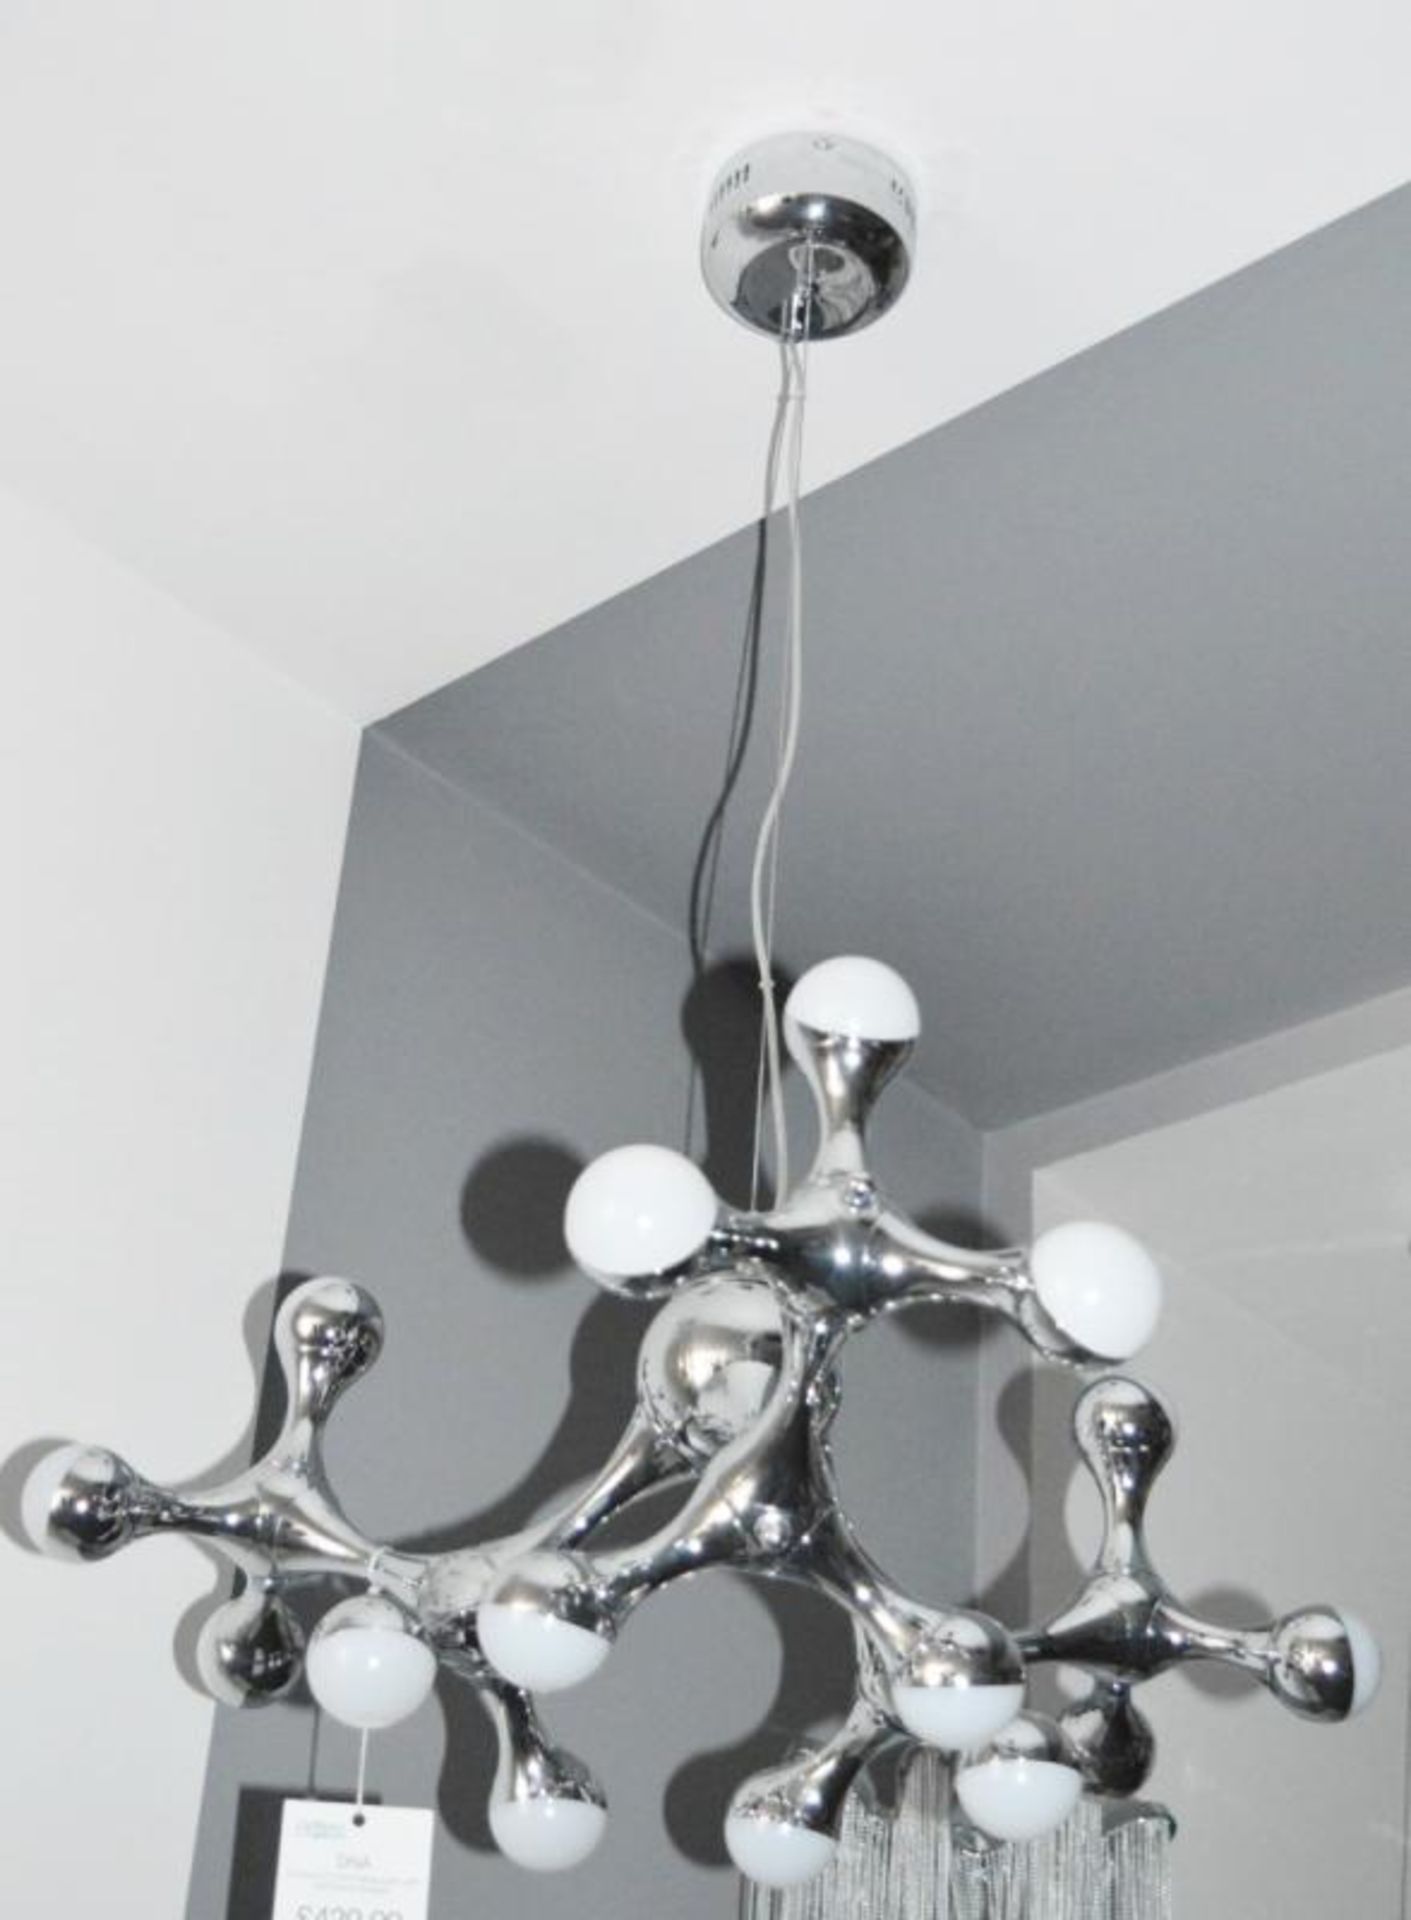 1 x DNA Chrome 15 LED Ceiling Light With Half Dome Shades - Contemporary European Design - Inspired - Image 6 of 6